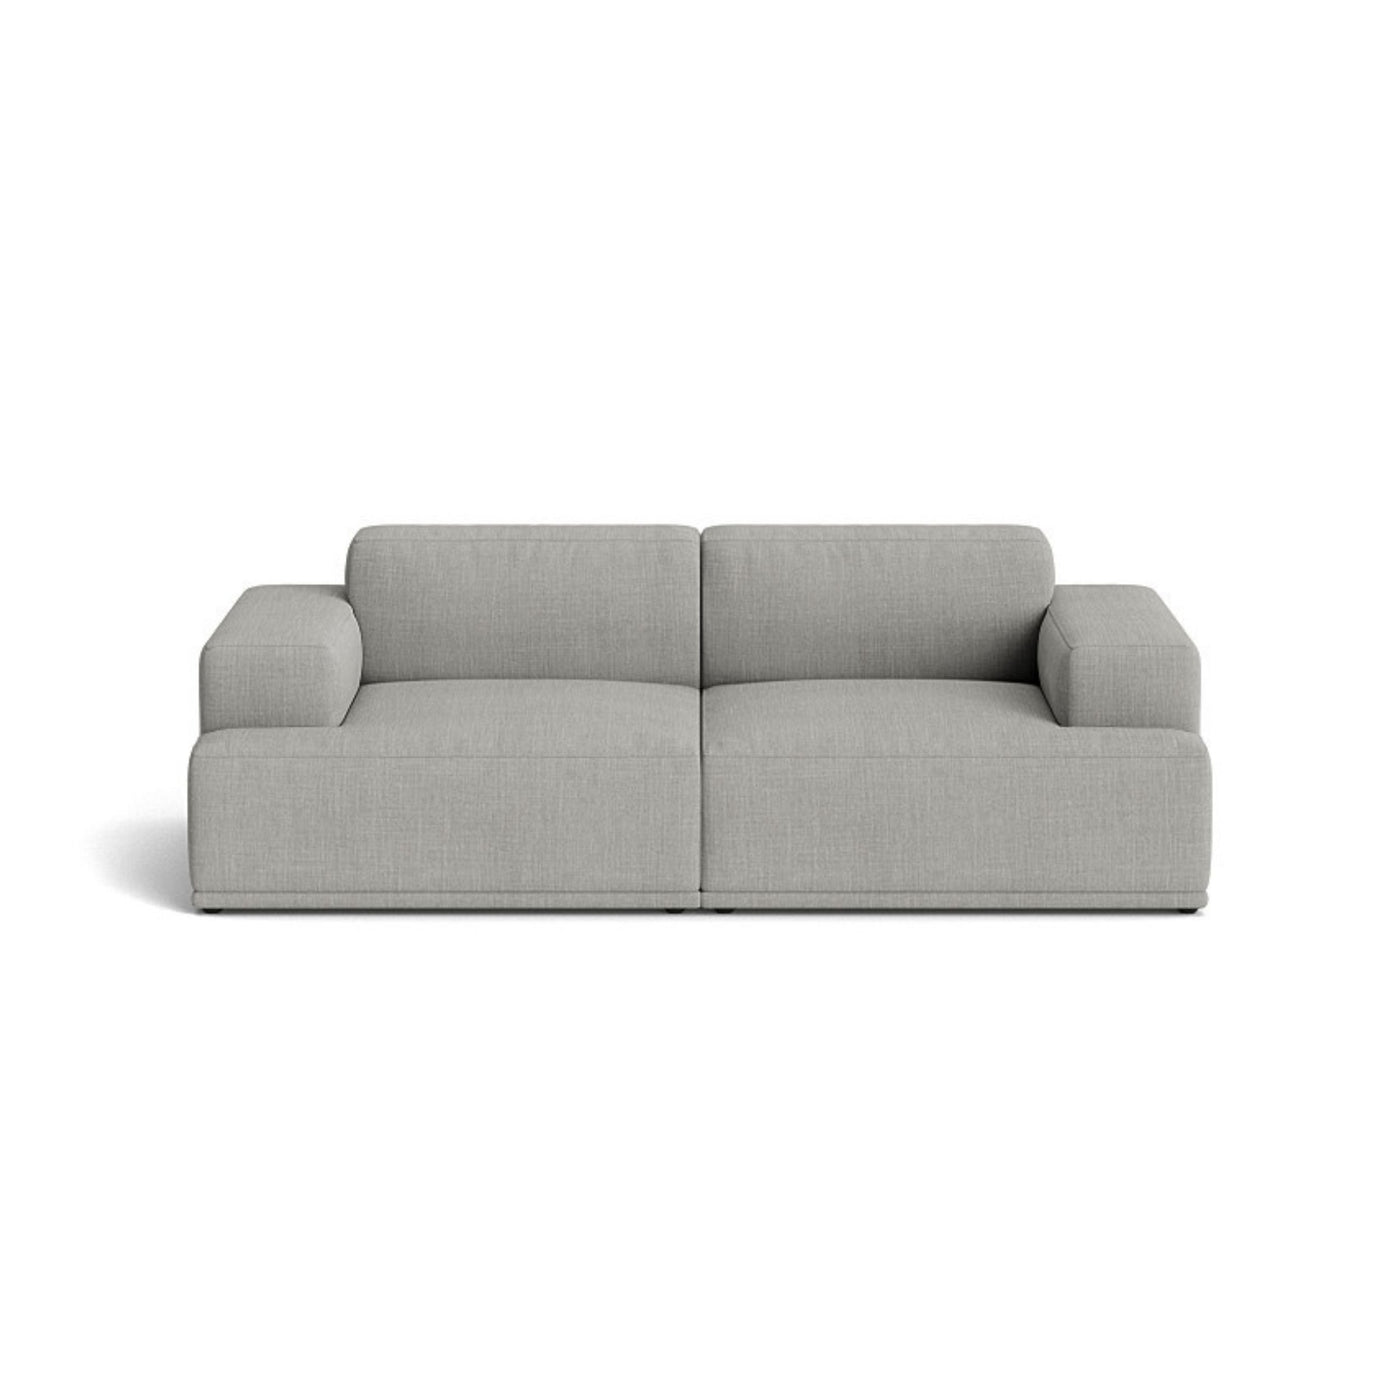 Muuto Connect Soft Modular 2 Seater Sofa, configuration 1. made-to-order from someday designs. #colour_fiord-151